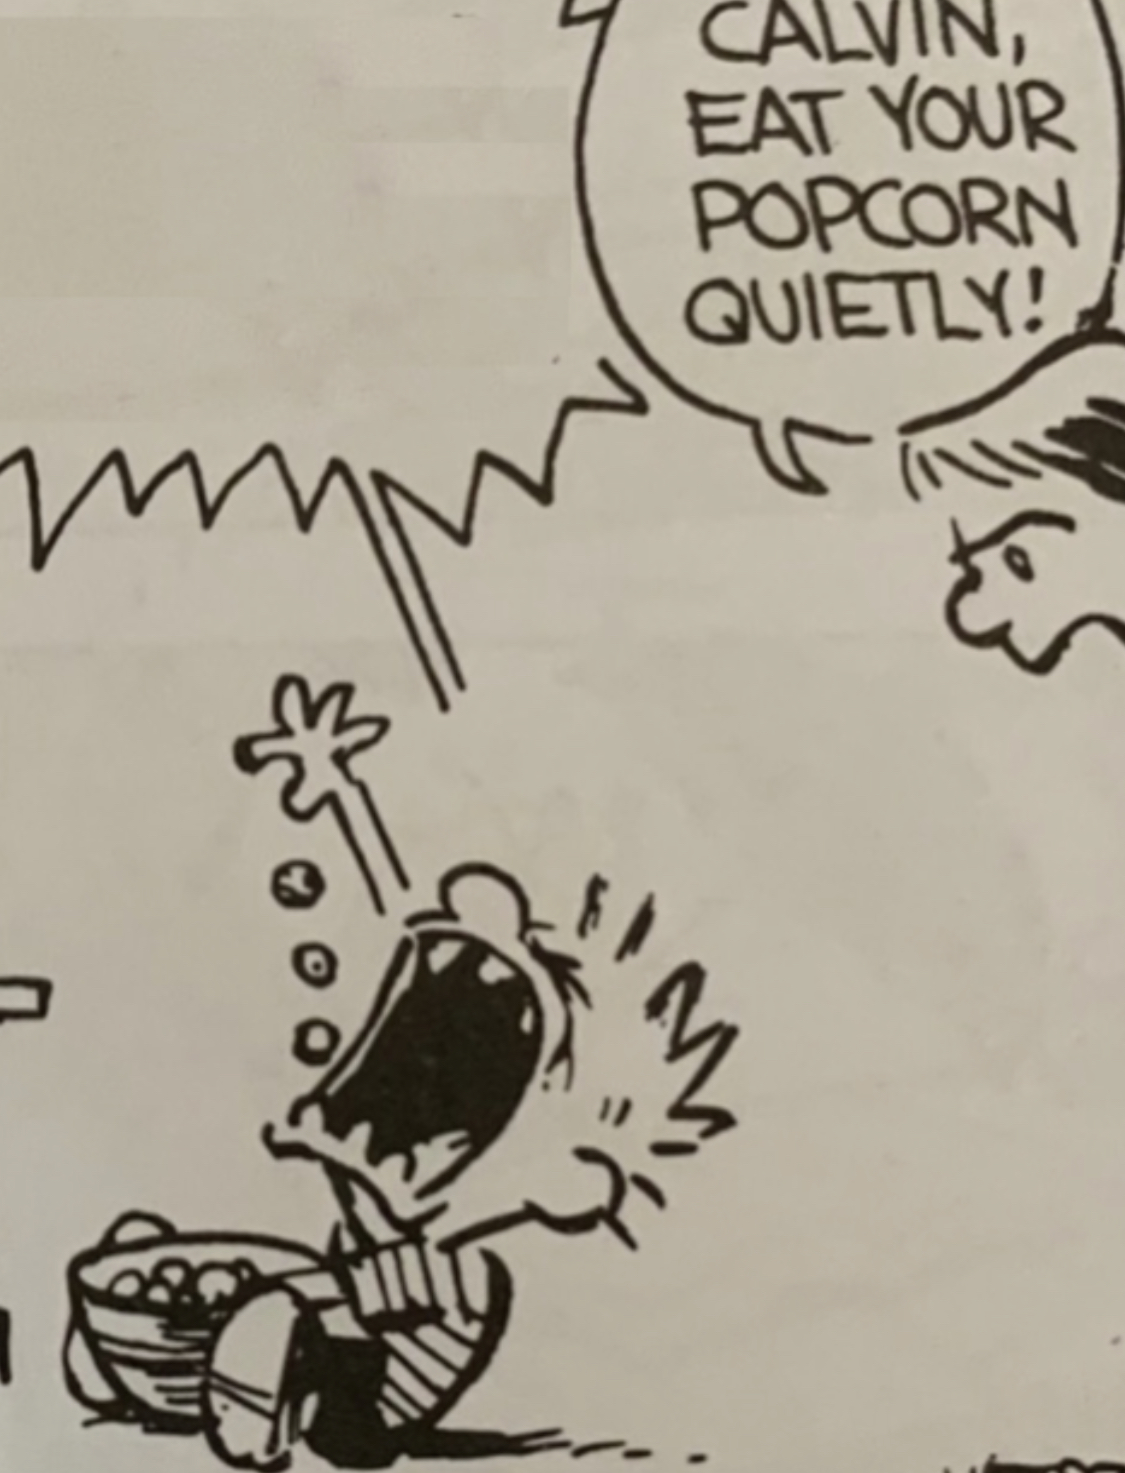 Calvin eat your popcorn quietly Blank Meme Template